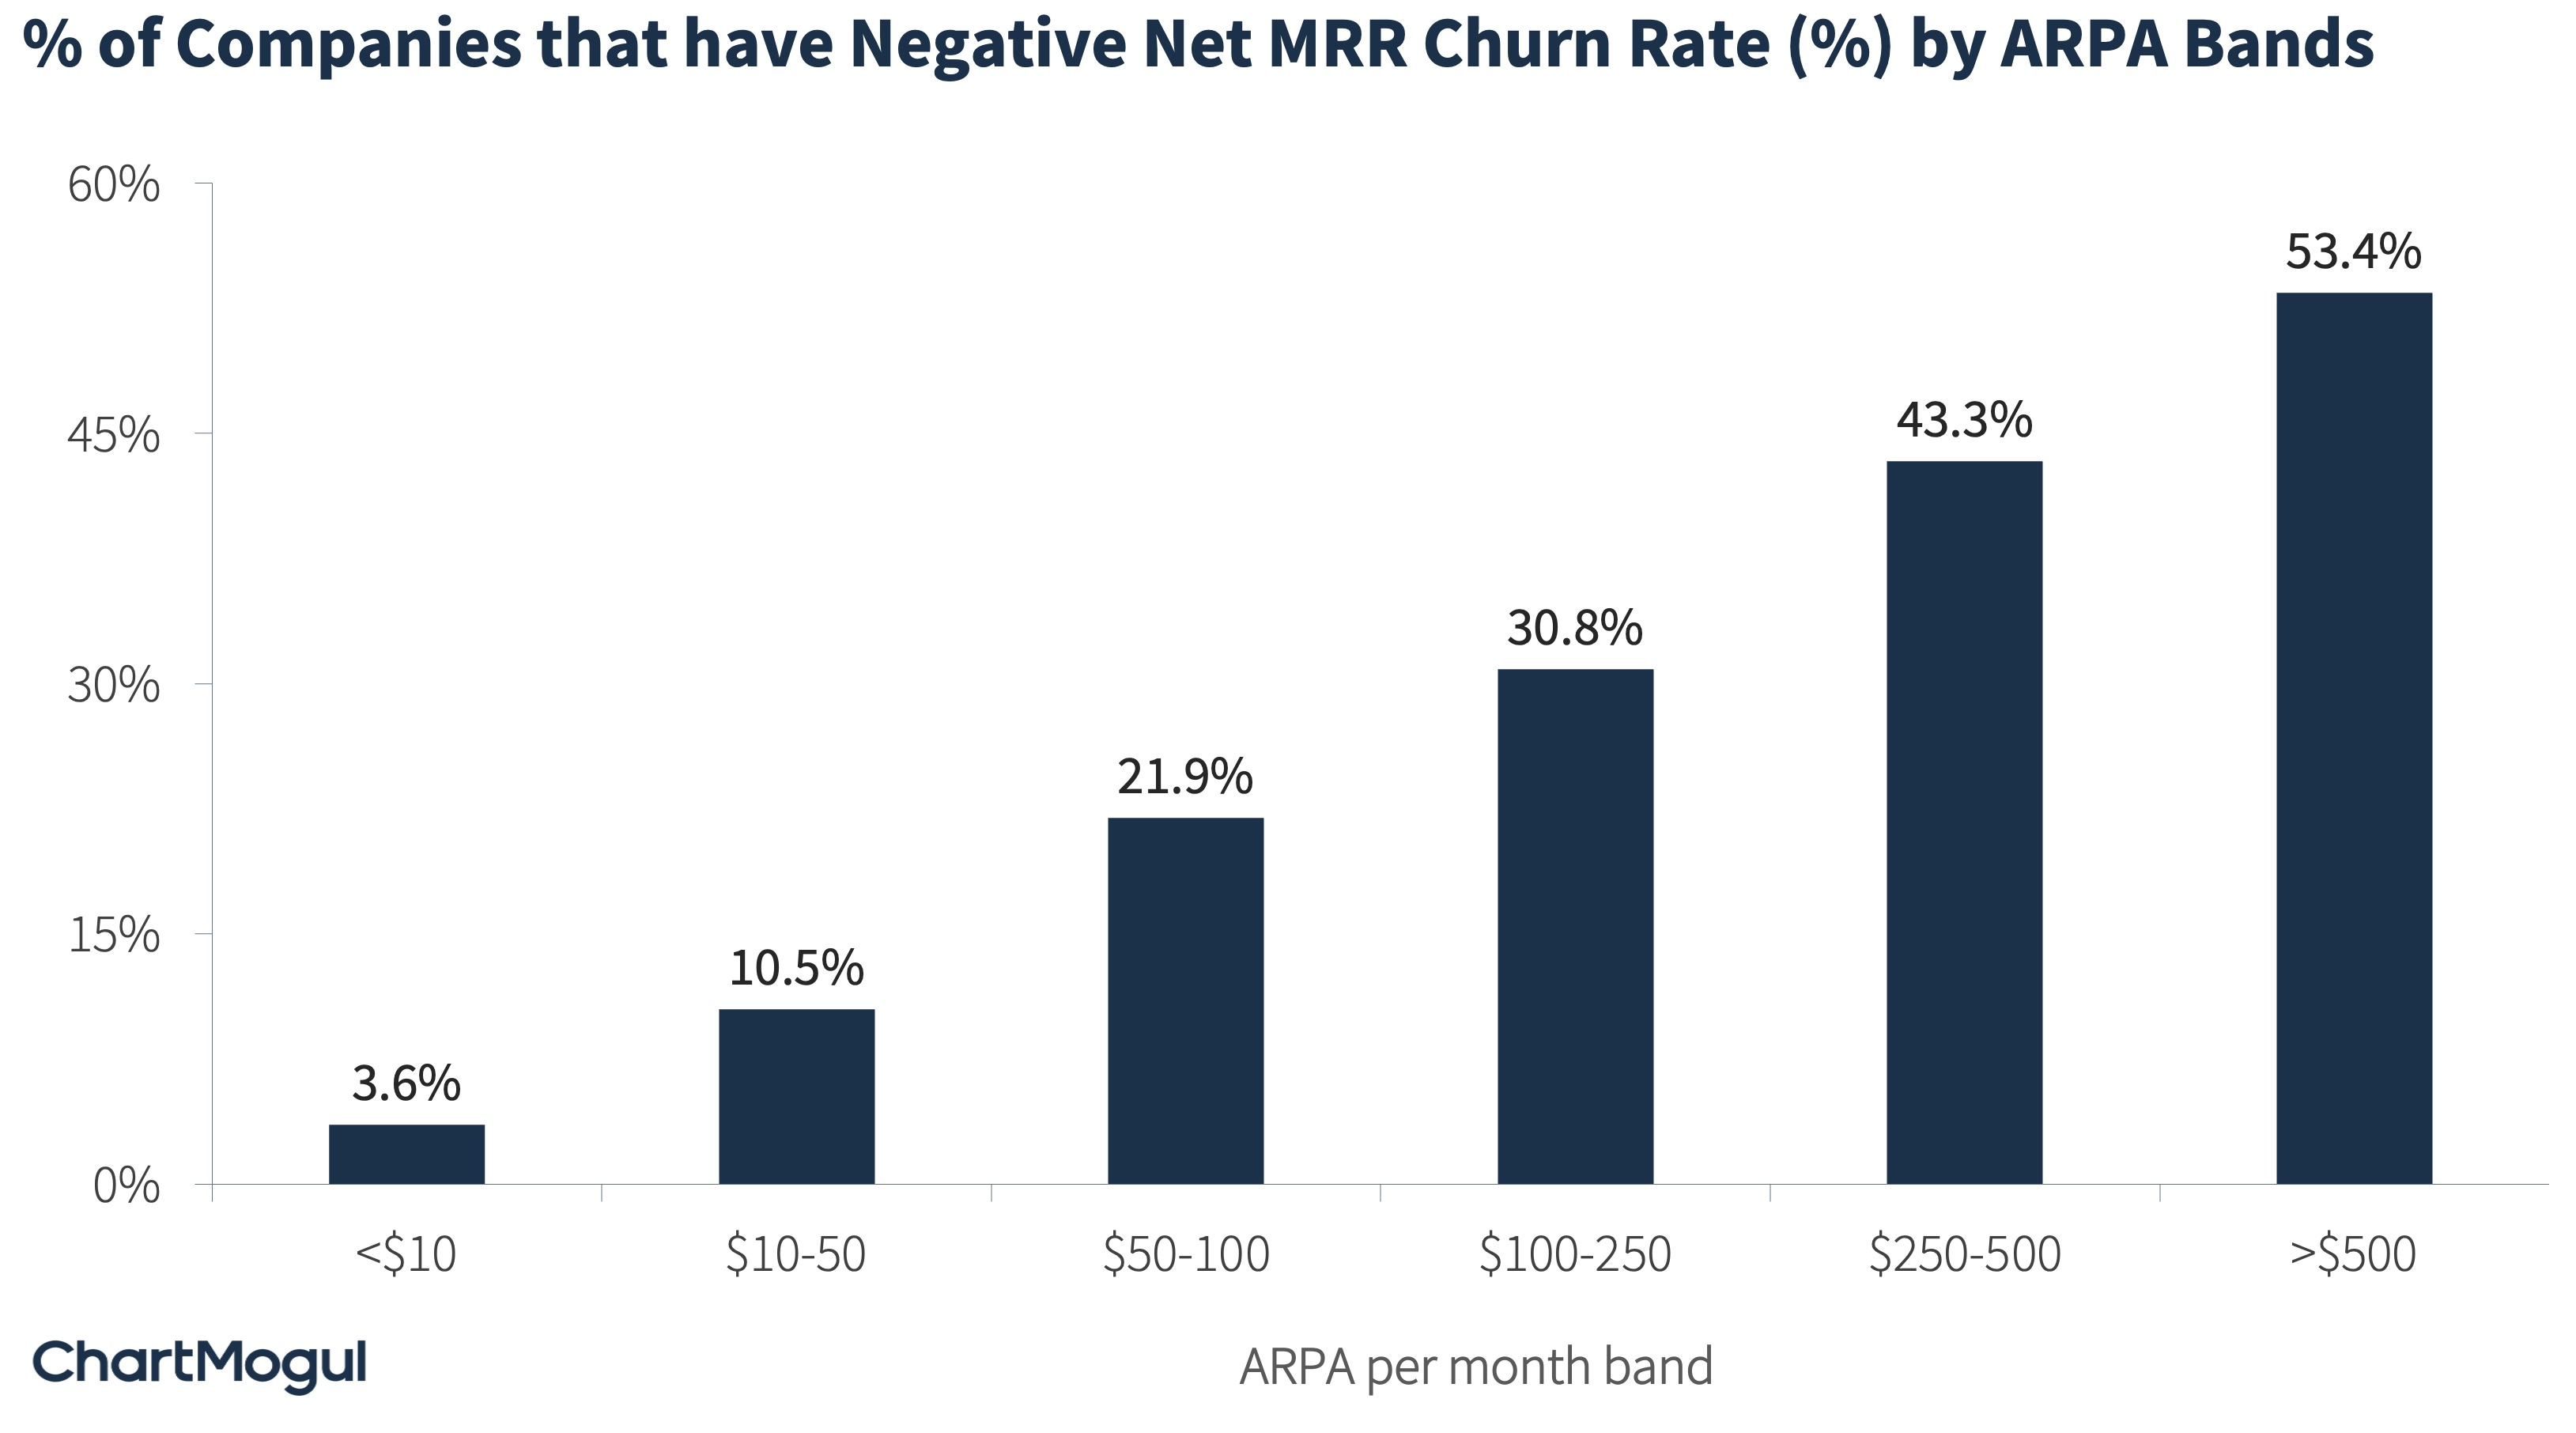 Percentage of companies with negative net MRR churn by ARPA bands